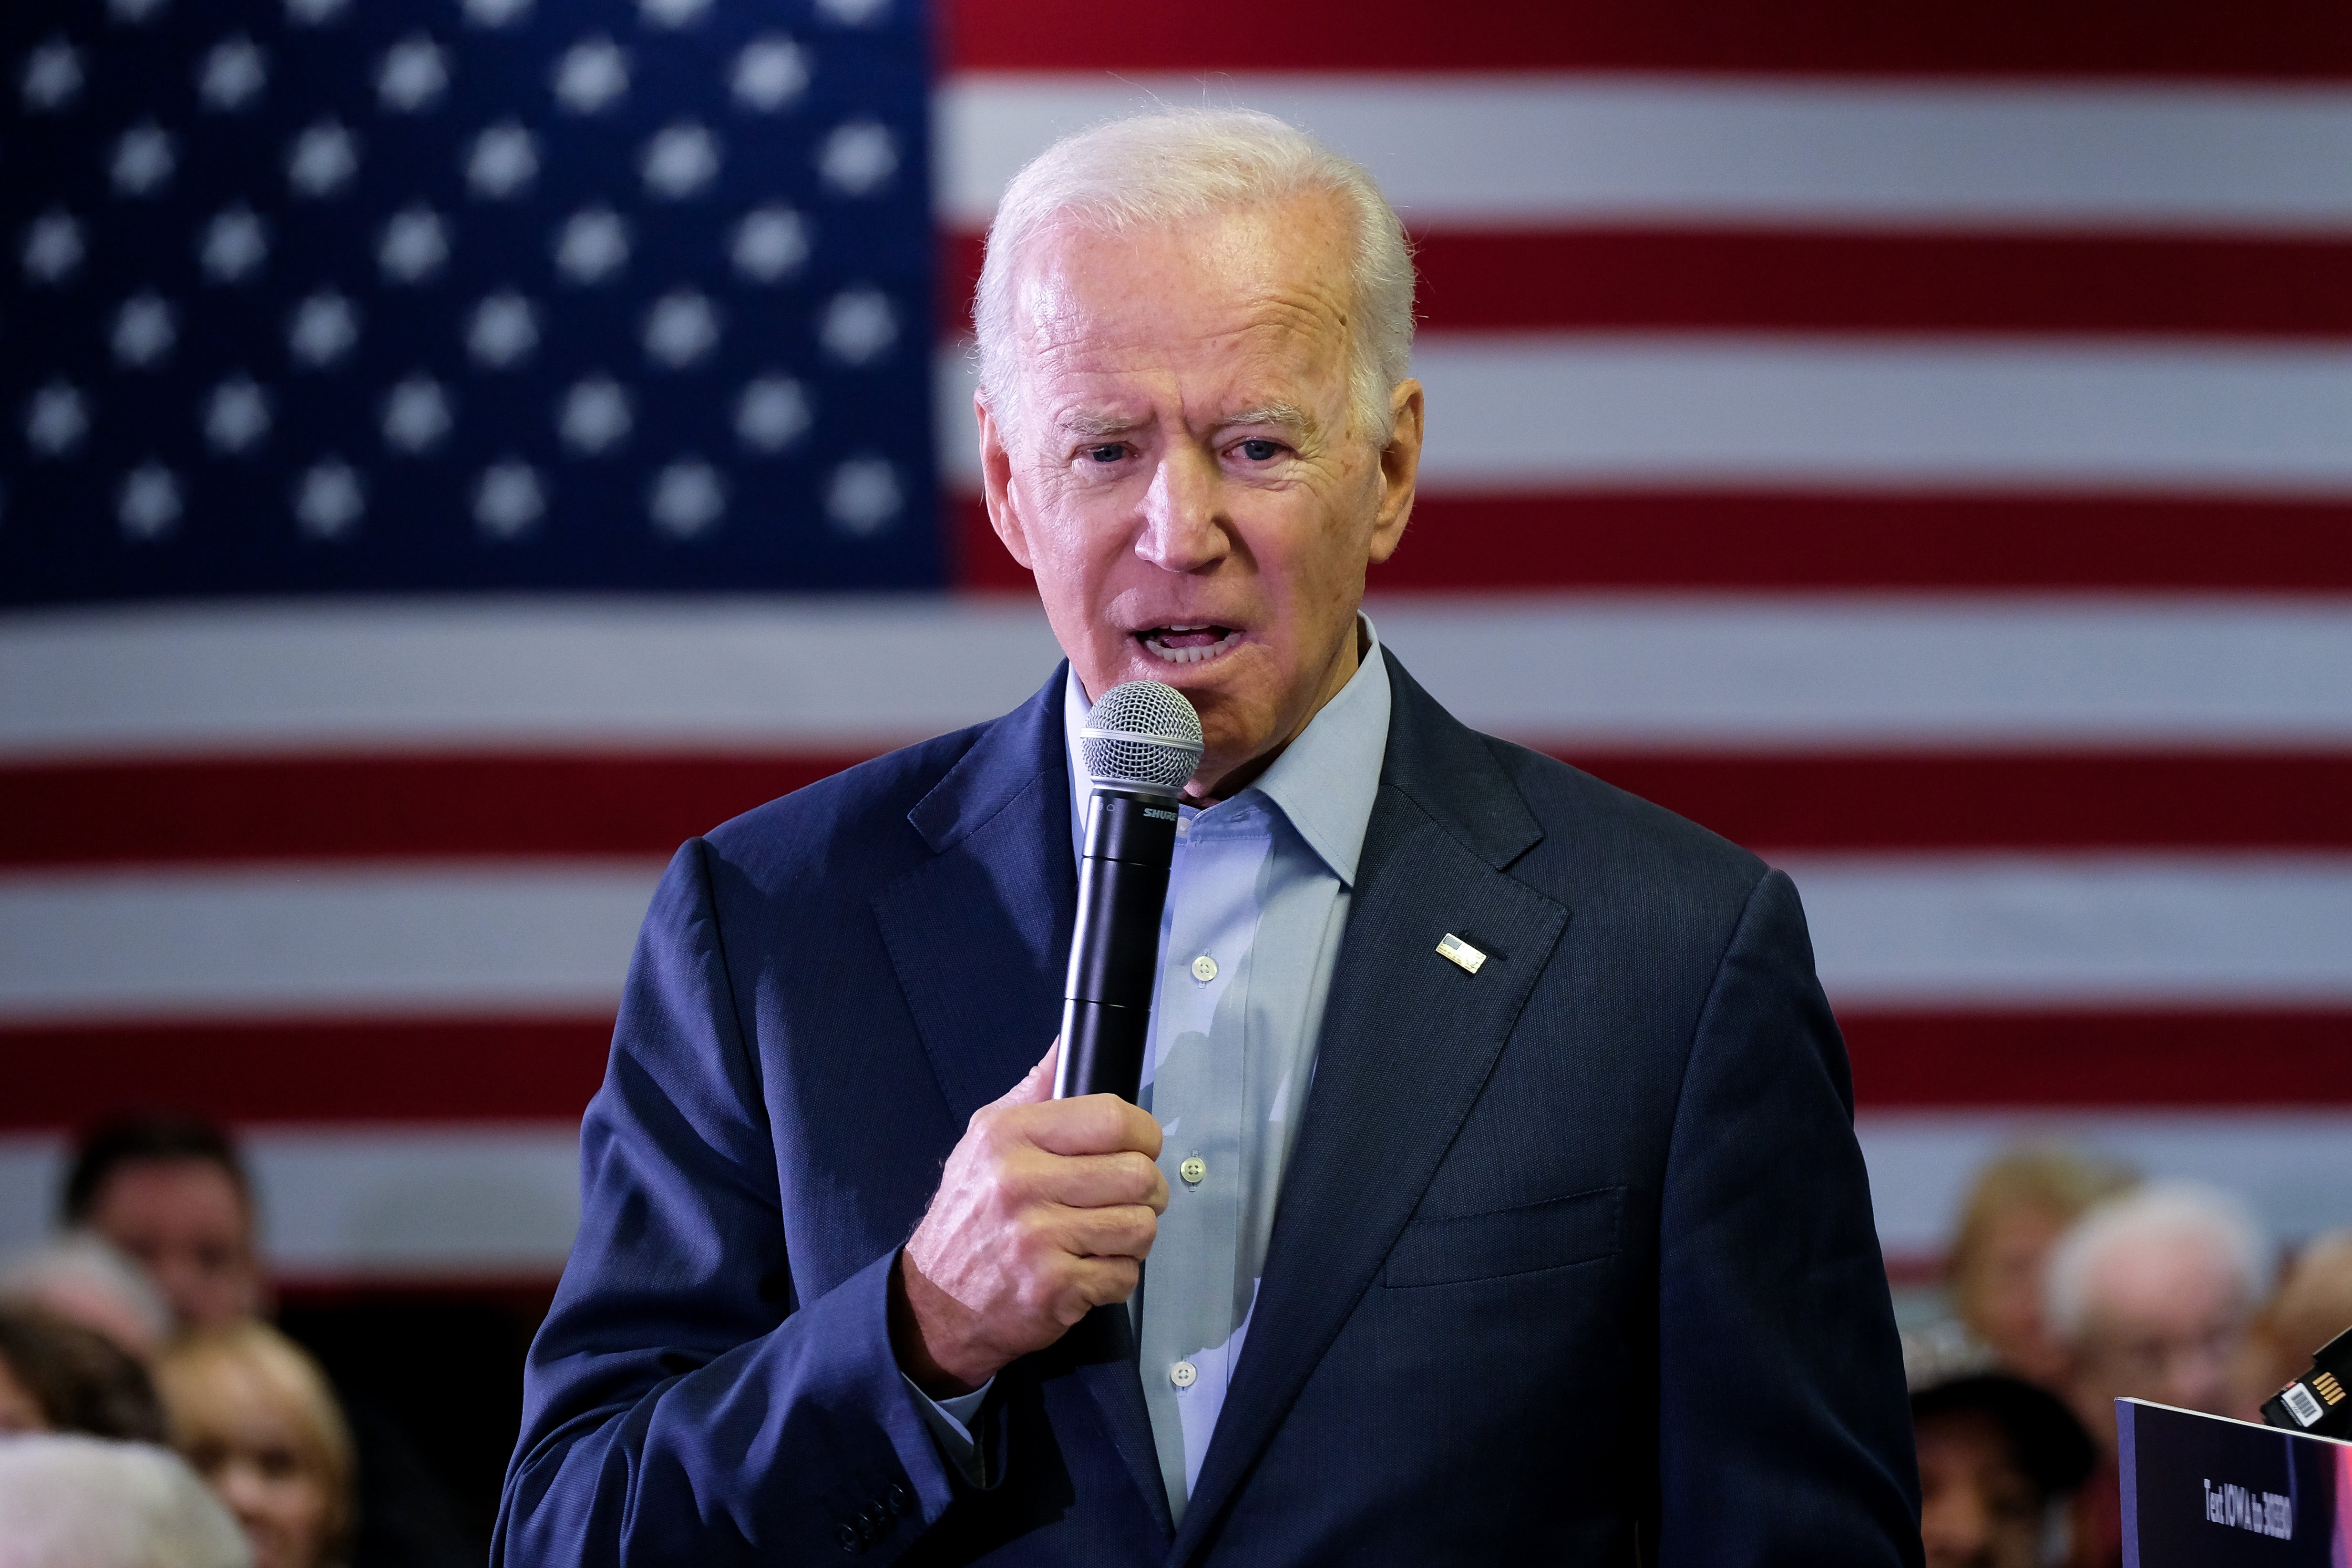 Biden Vows To Never Stop Fighting For Black Community After Questionable Remarks On Diversity